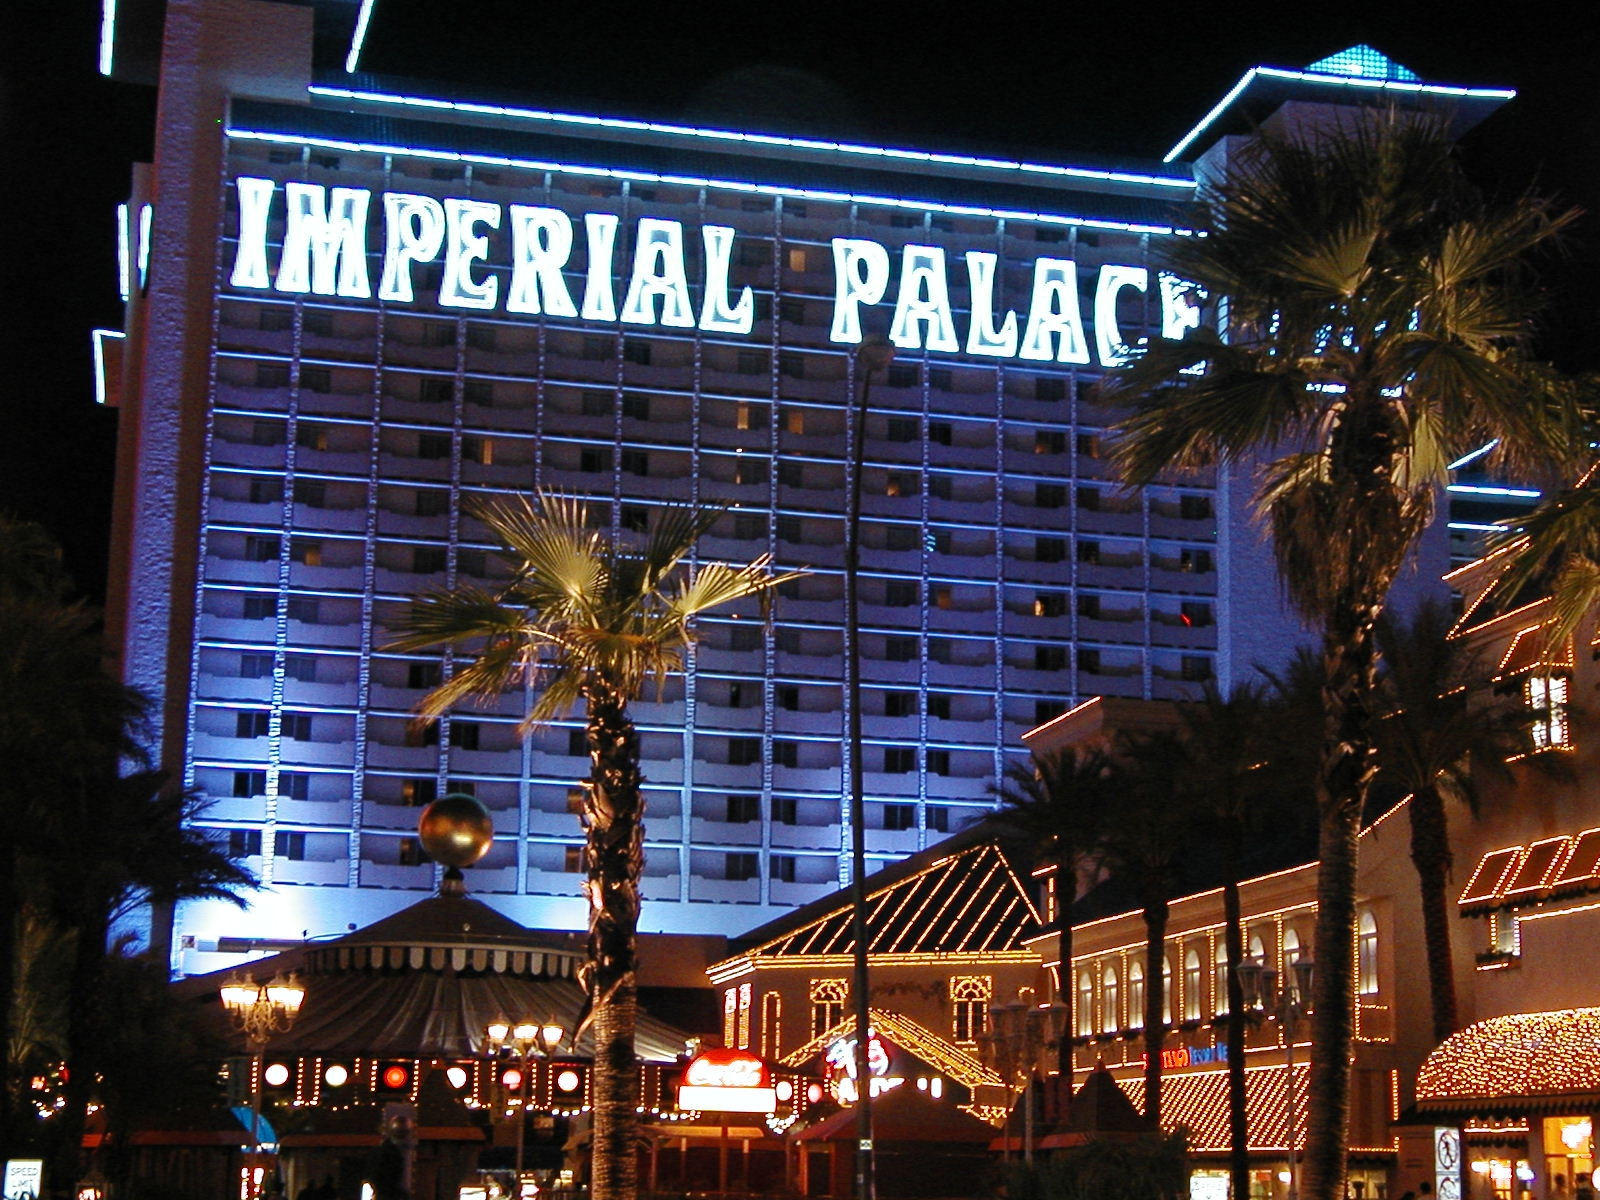 Imperial Palace Casino